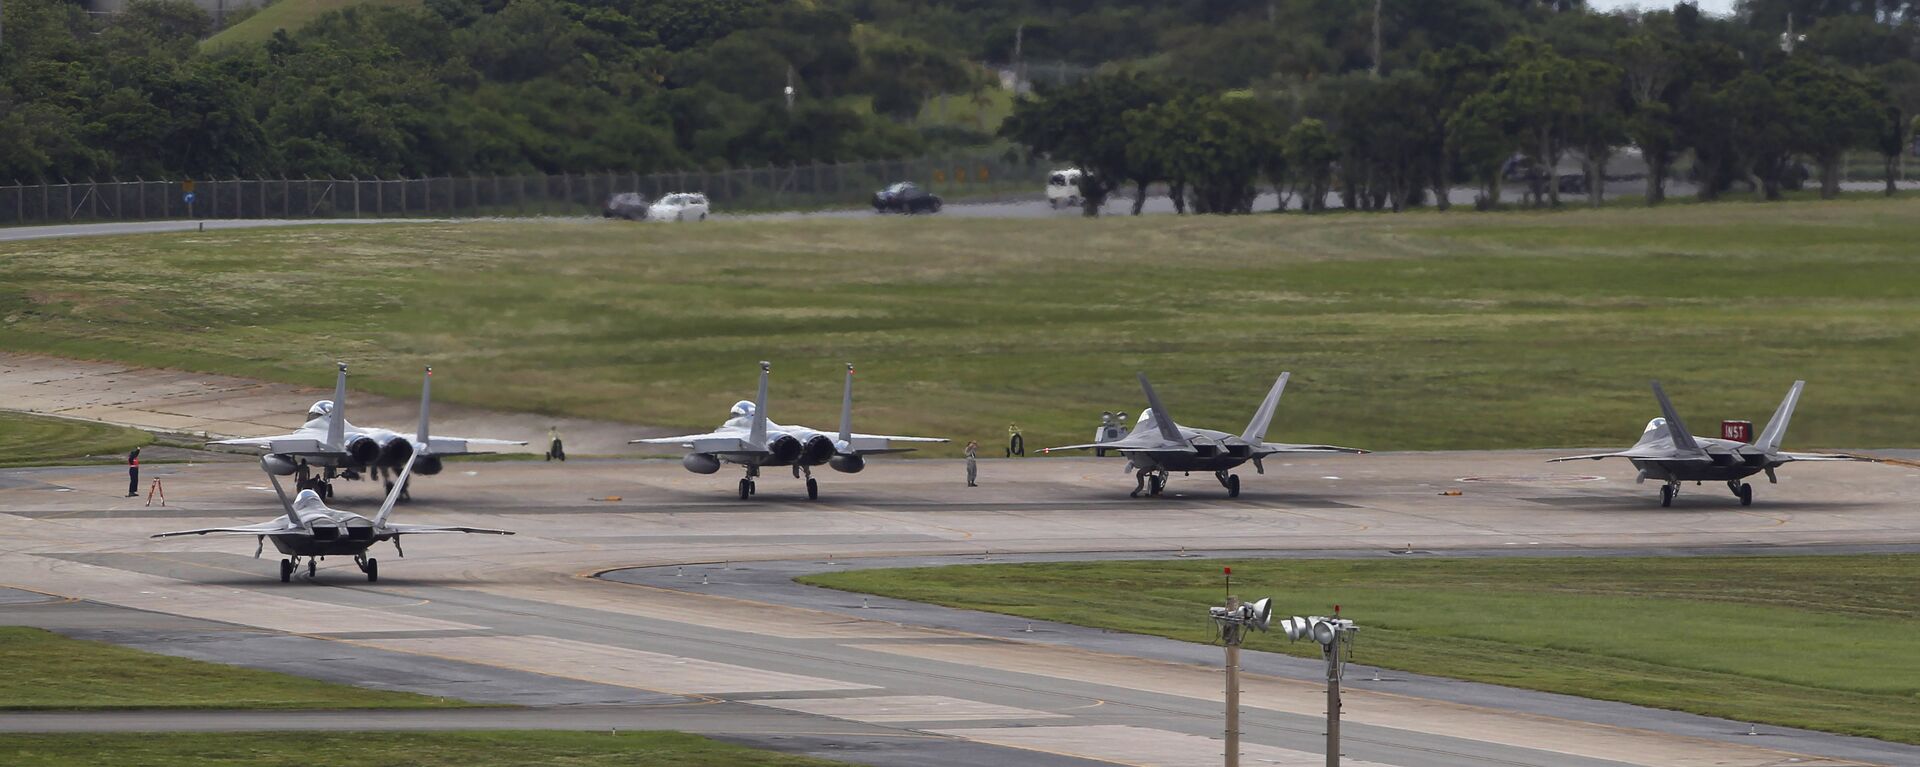  U.S. Air Force F-22 Raptors, right, and two F-15 Eagles prepare for take-off at Kadena Air Base on the southern island of Okinawa, in Japan (File) - Sputnik International, 1920, 22.06.2020